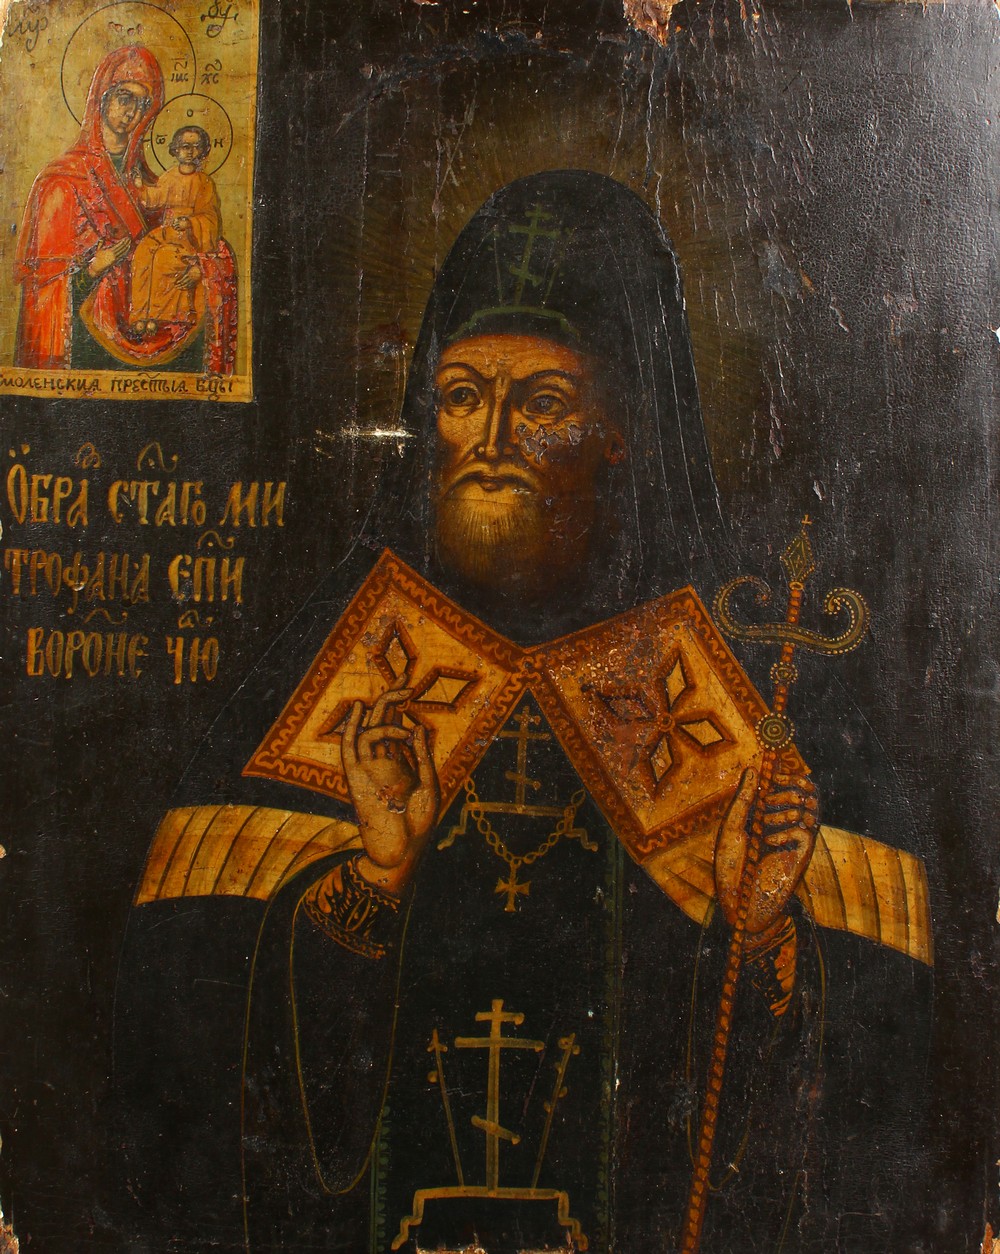 A RUSSIAN ICON. SAINT MITROFAN OF VORONEZH (1623-1703), on wood. See label on reverse. 15.5ins x